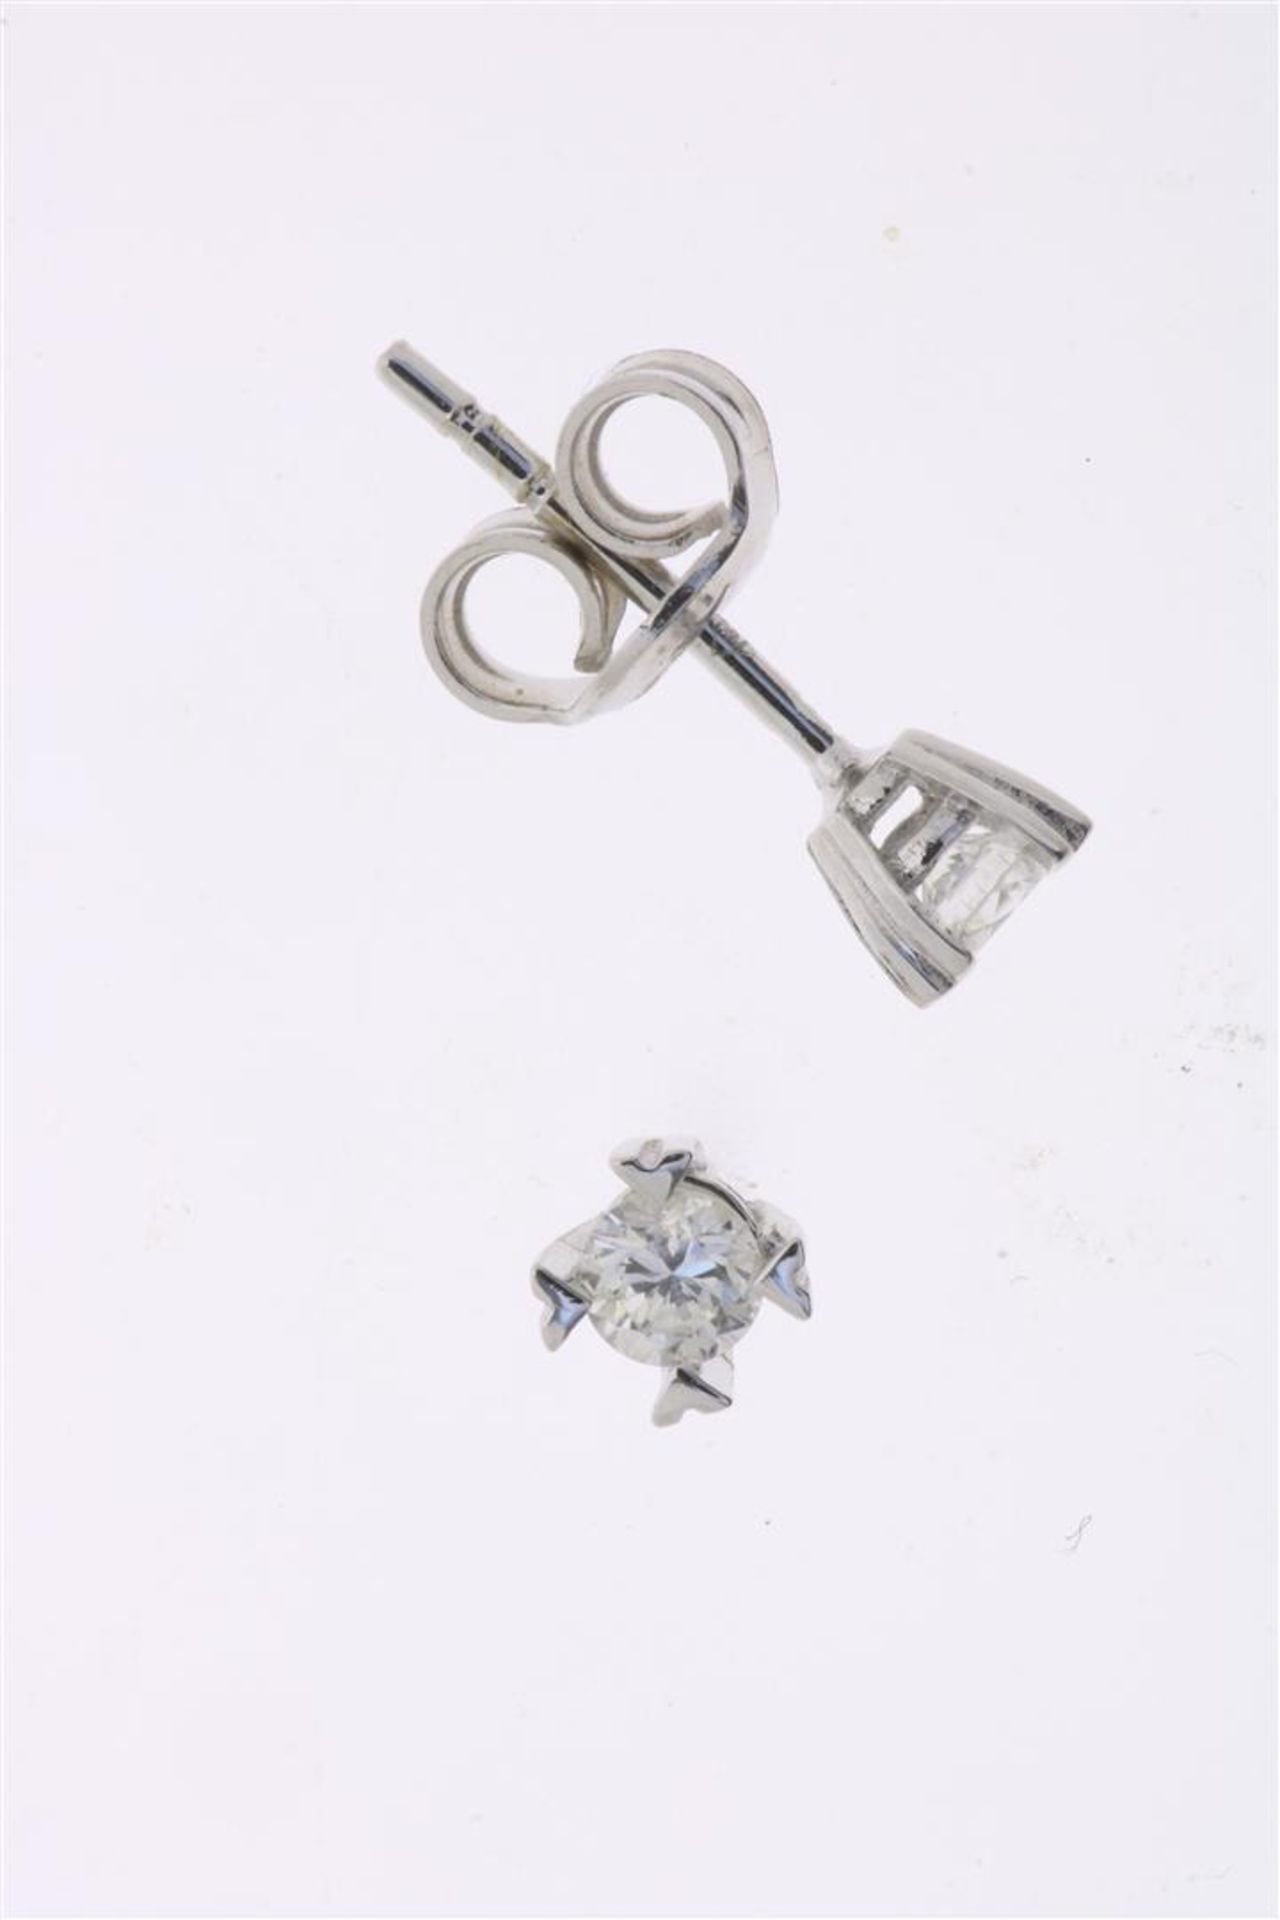 White gold solitaire ear studs set with brilliant cut diamond, approximately 0.22 ct., F/G, VS/SI,